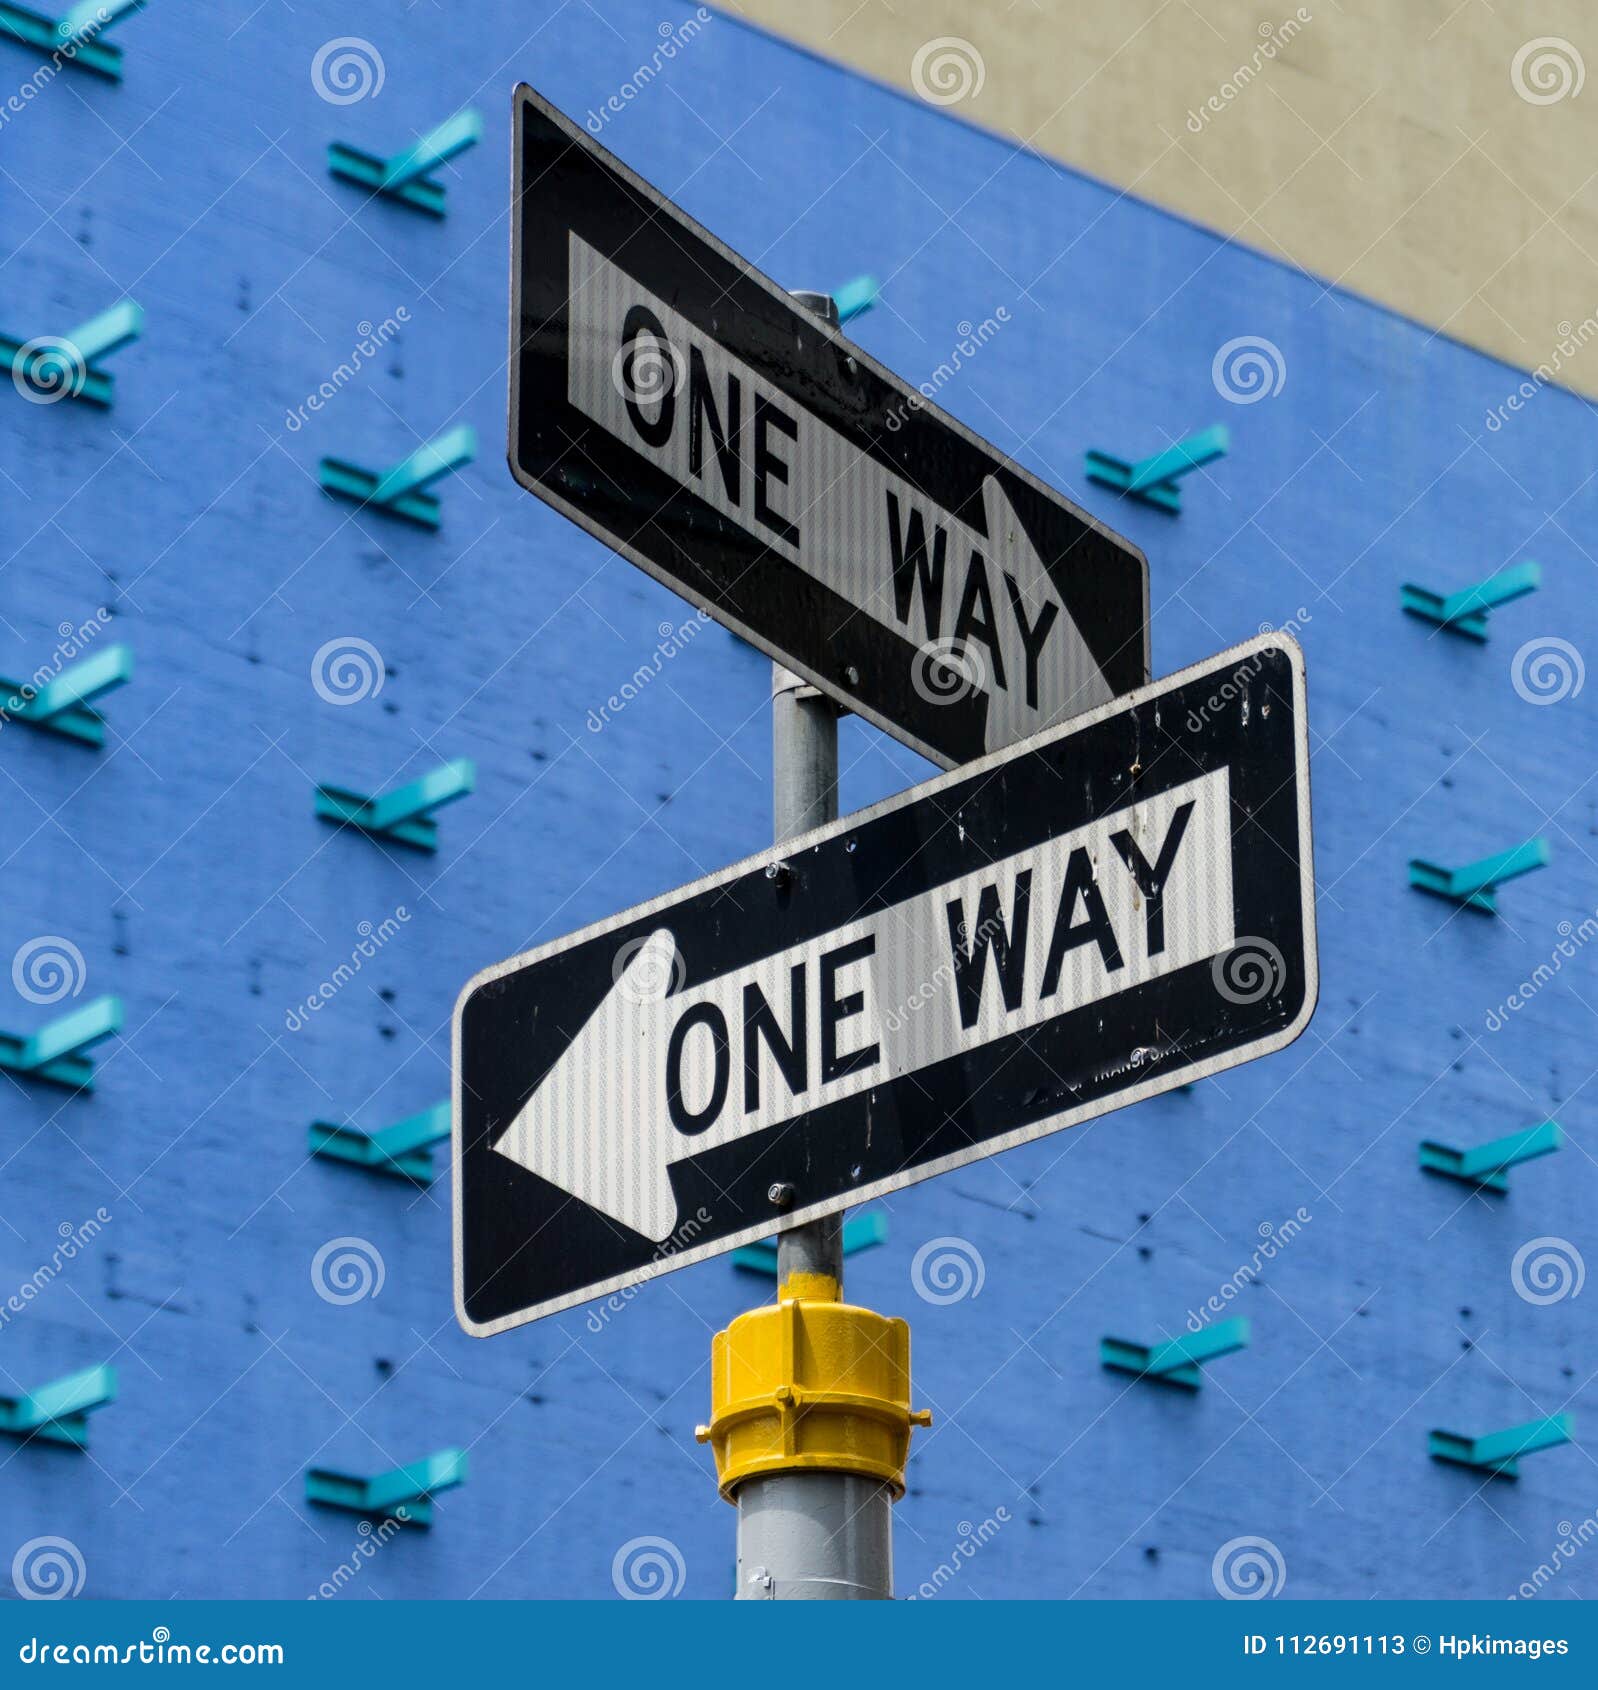 One Way street signs stock image. Image of oneway, blue - 112691113 One Way Street Signs